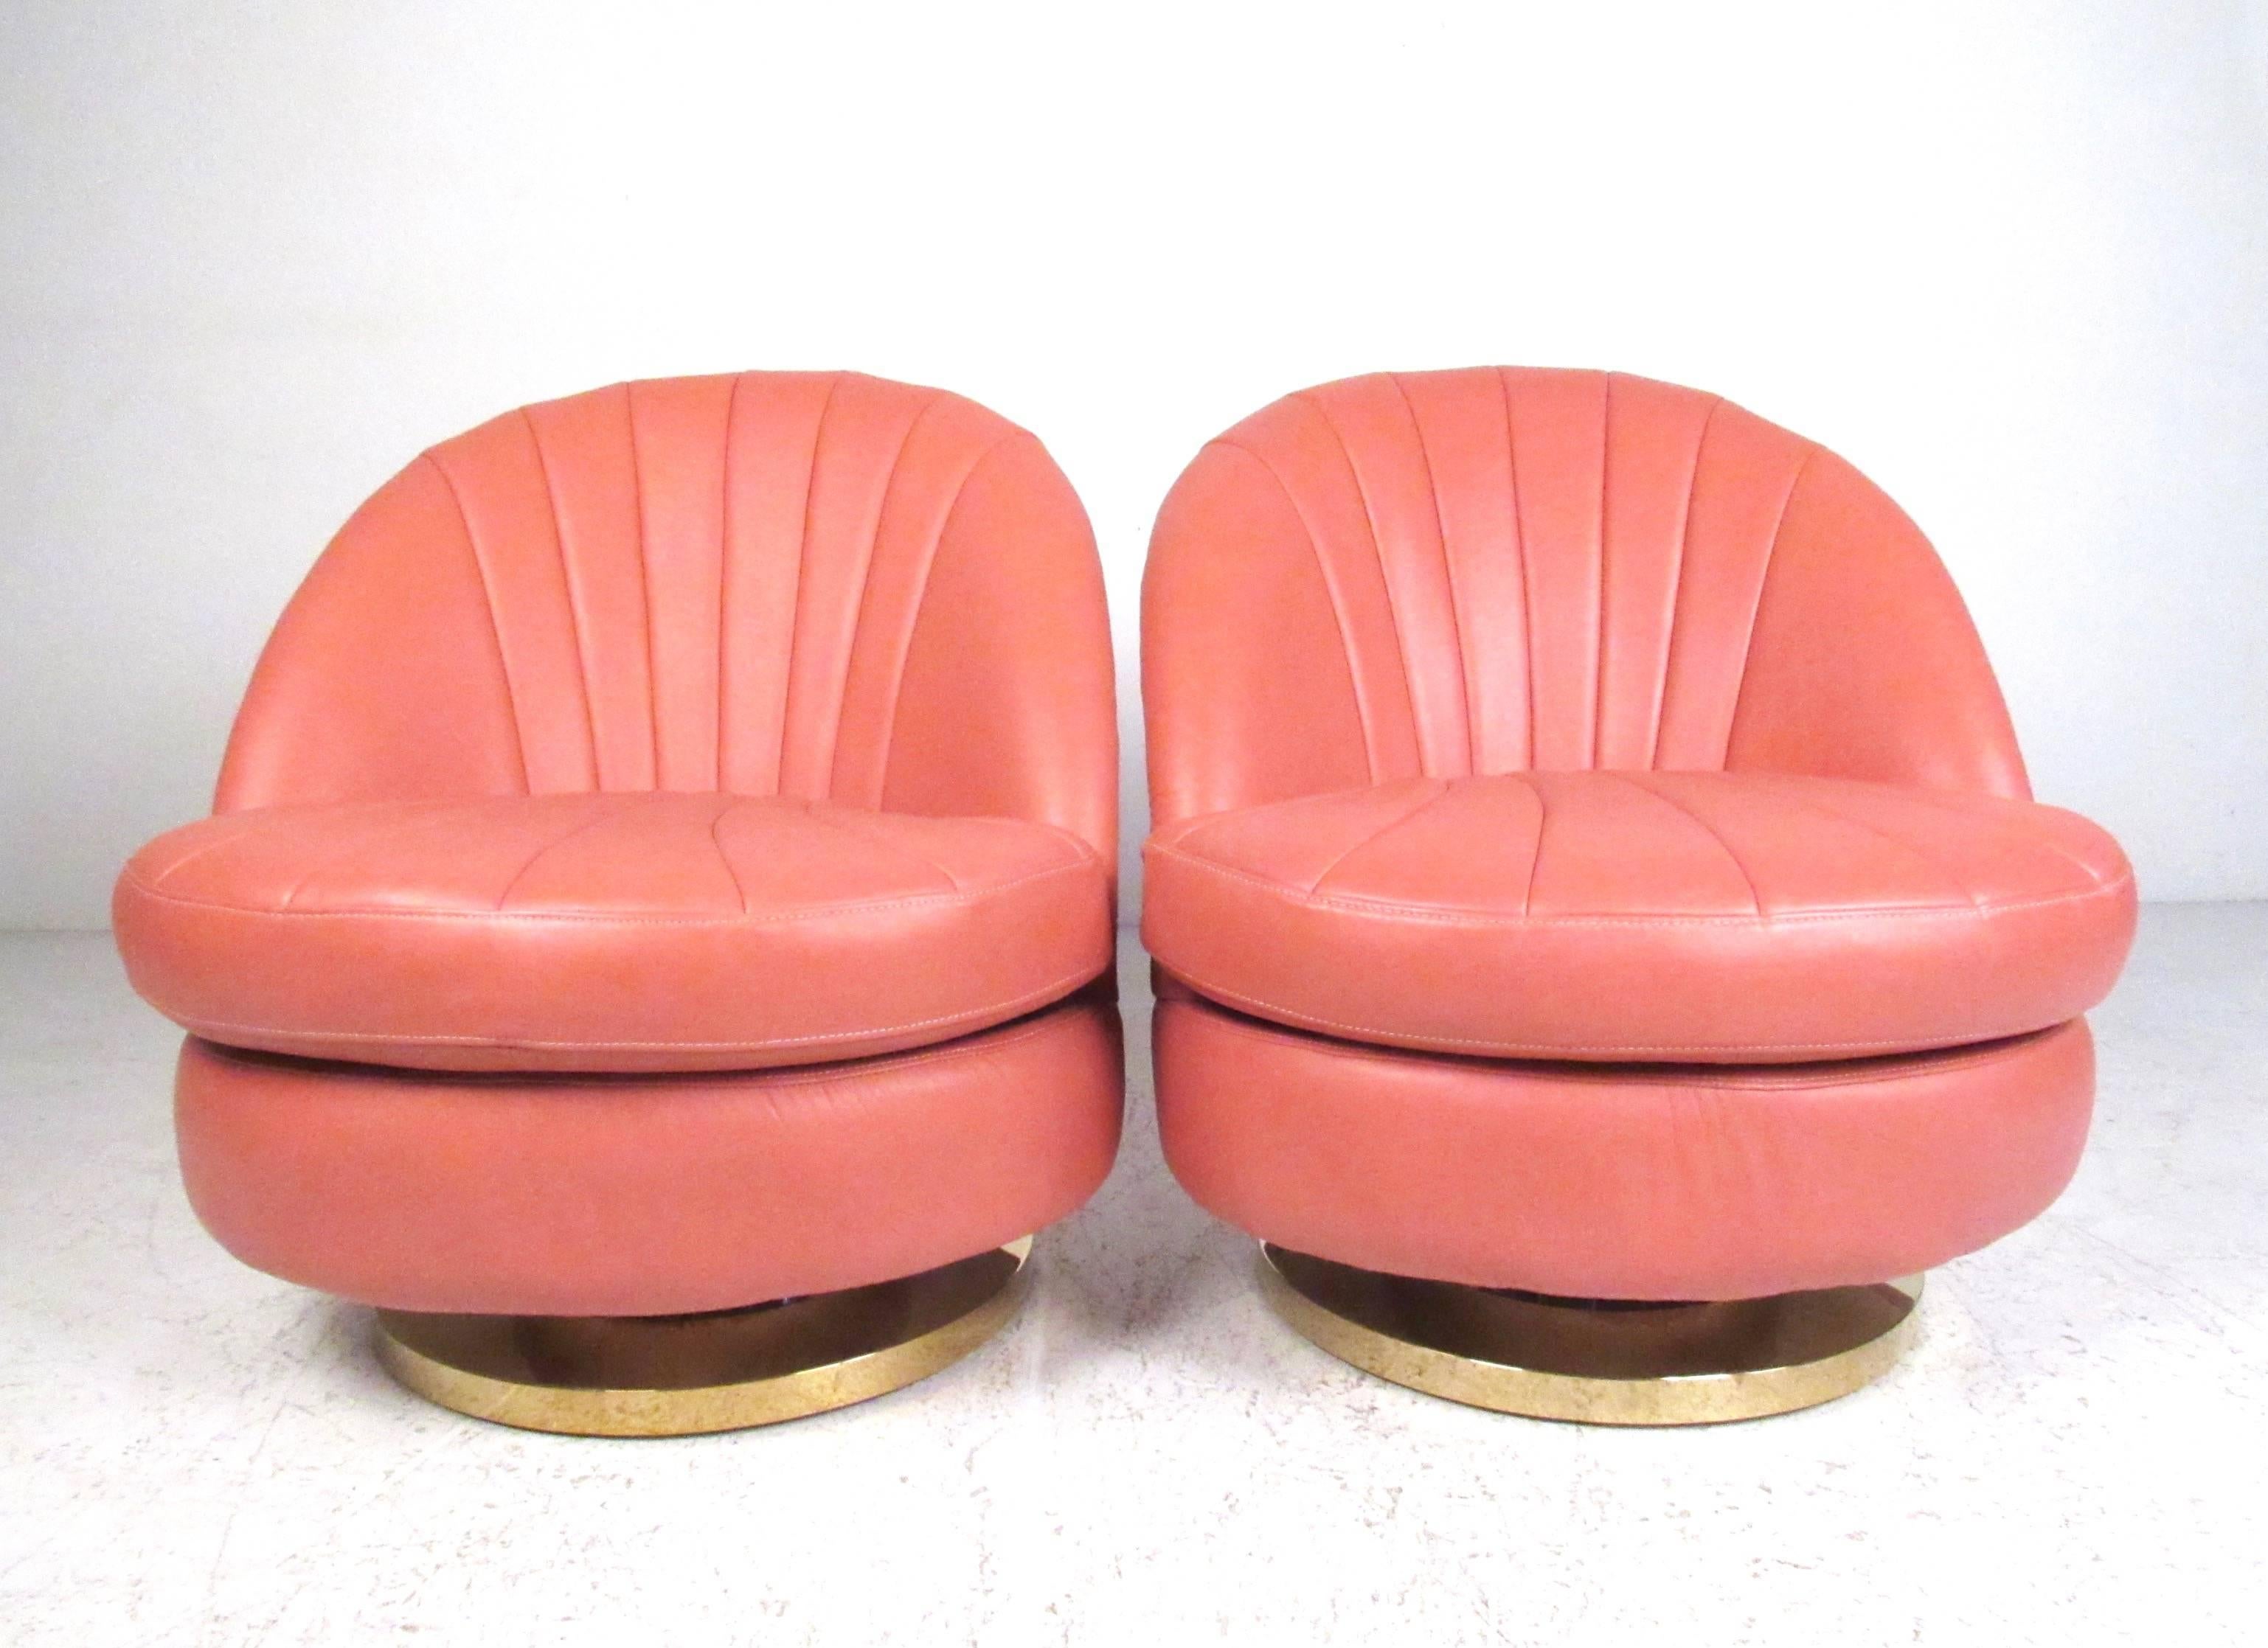 This unique pair of contemporary modern club chairs feature smooth swivel function with shell style seat backs. The comfortable pair of well-made leather lounge chairs make this impressive pair the perfect seating addition to home or business.